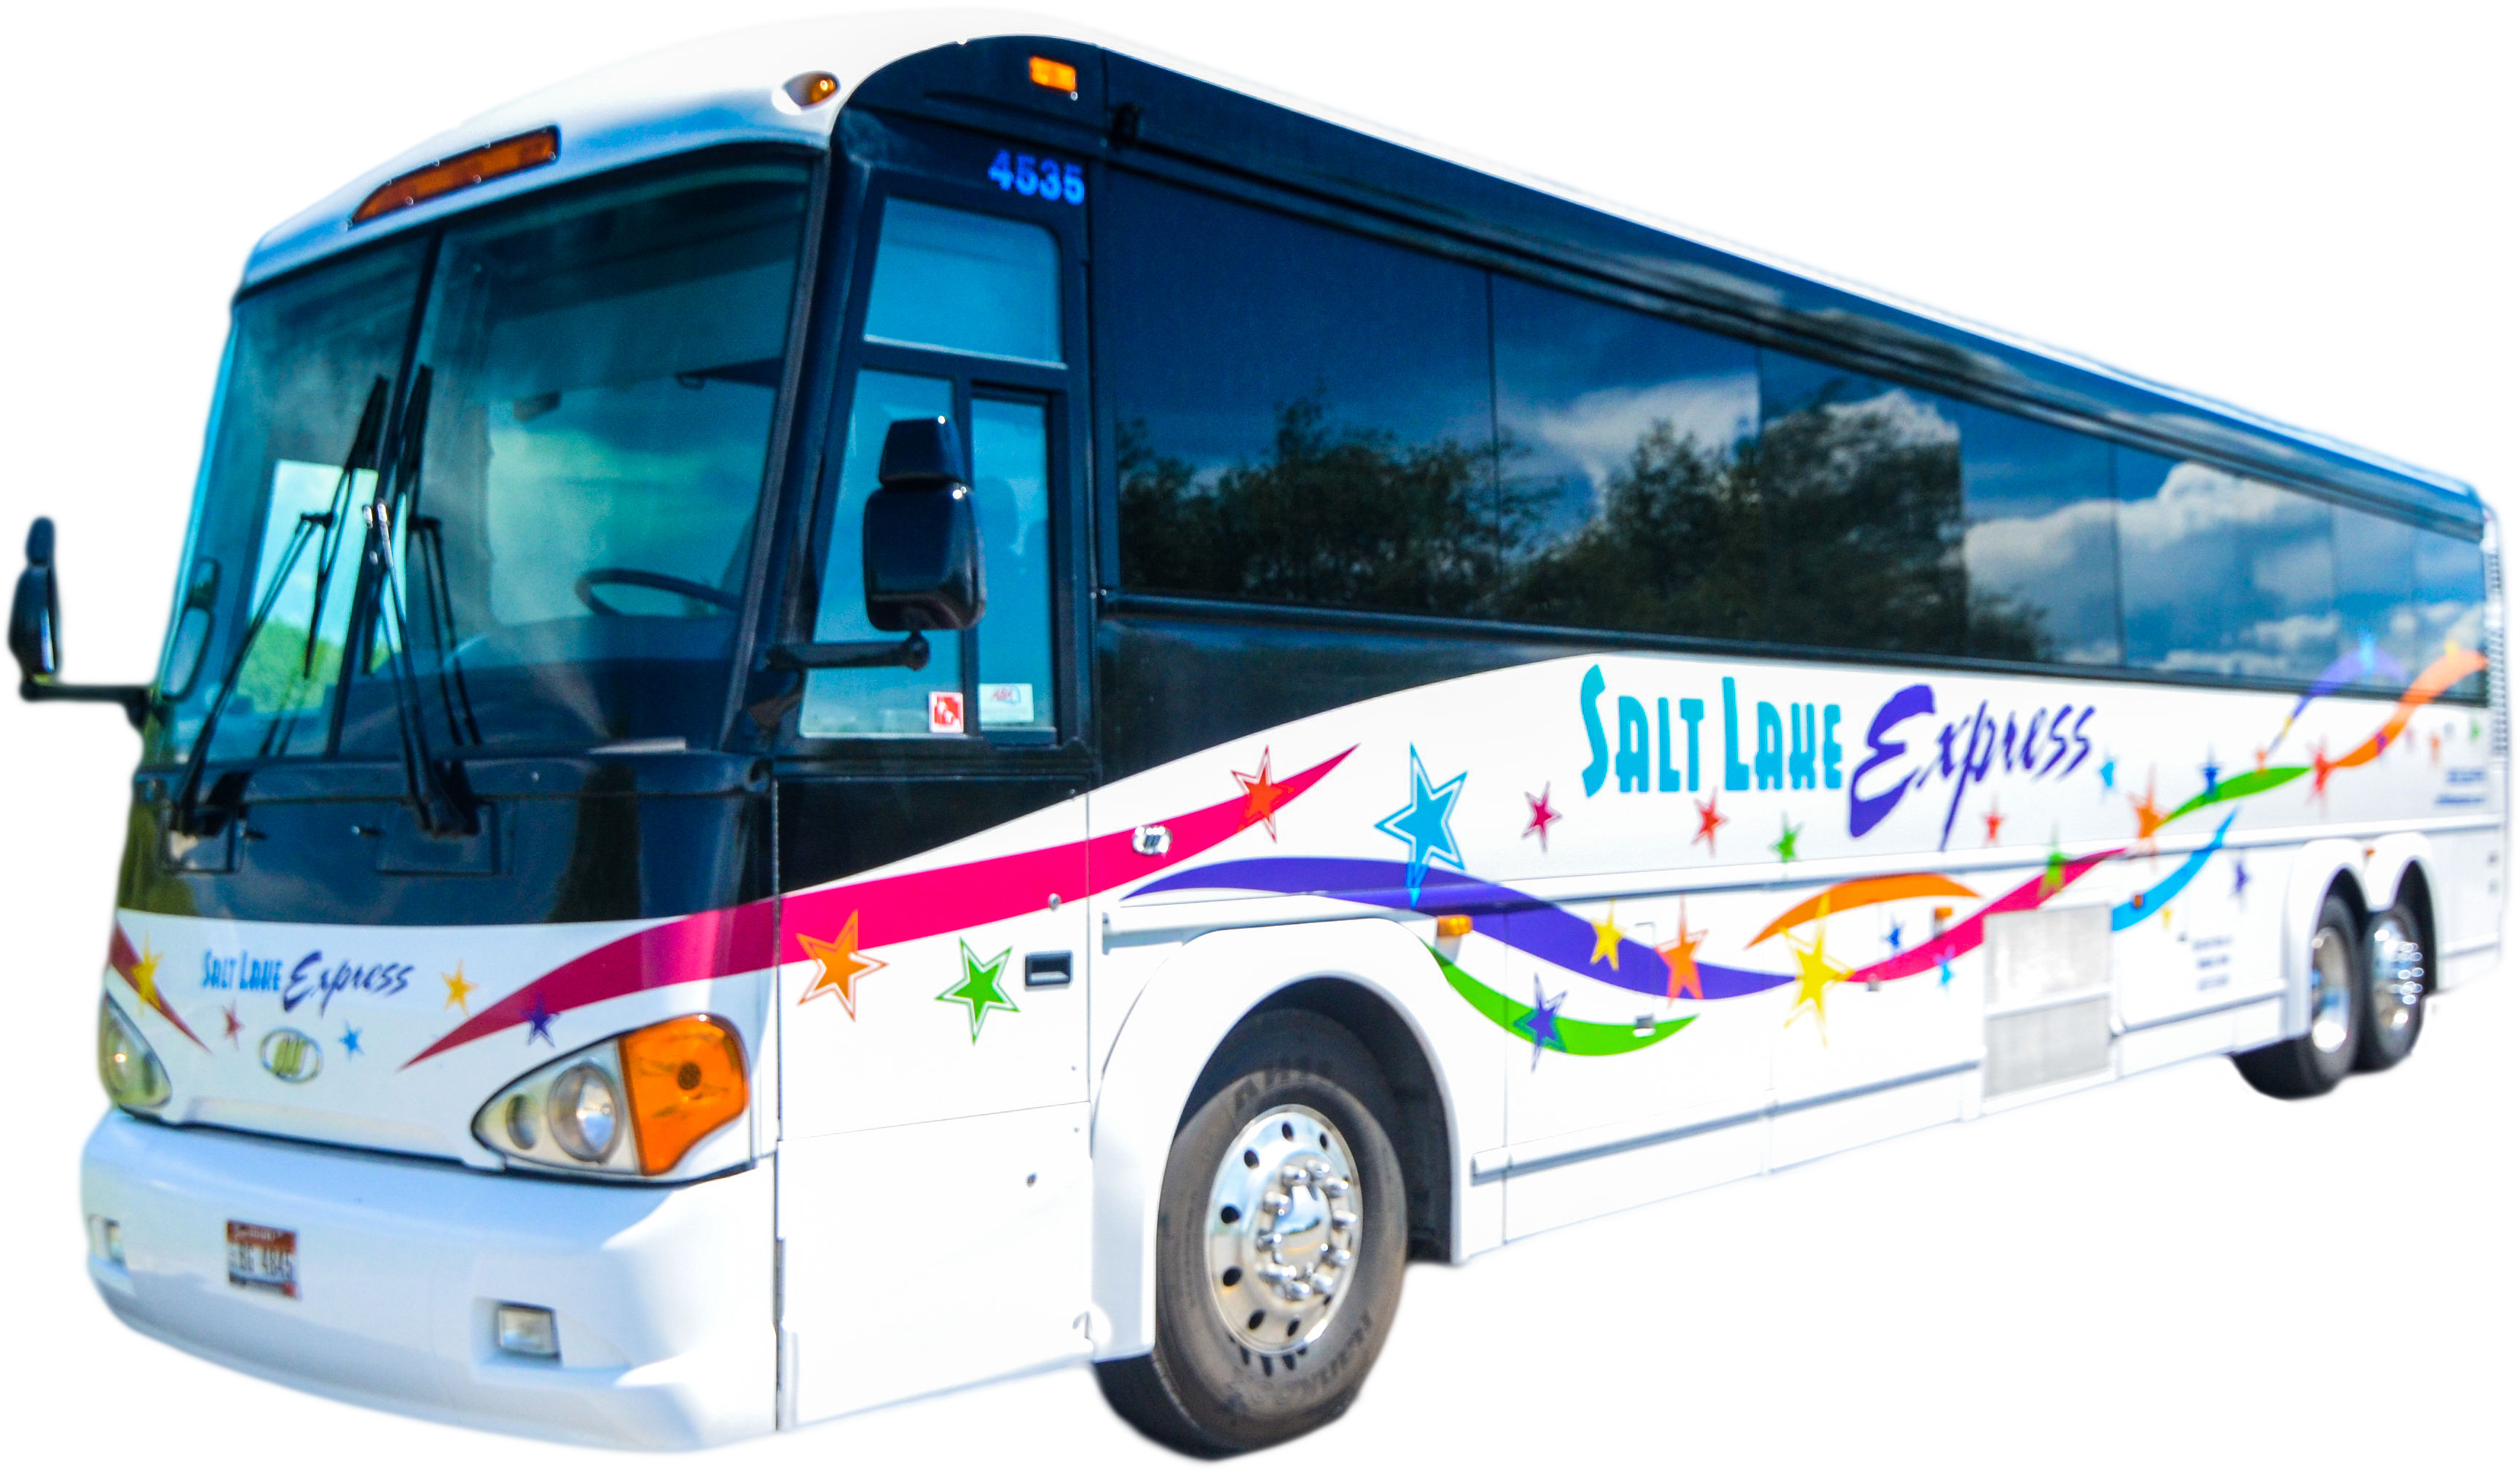 A White Bus With Colorful Decals